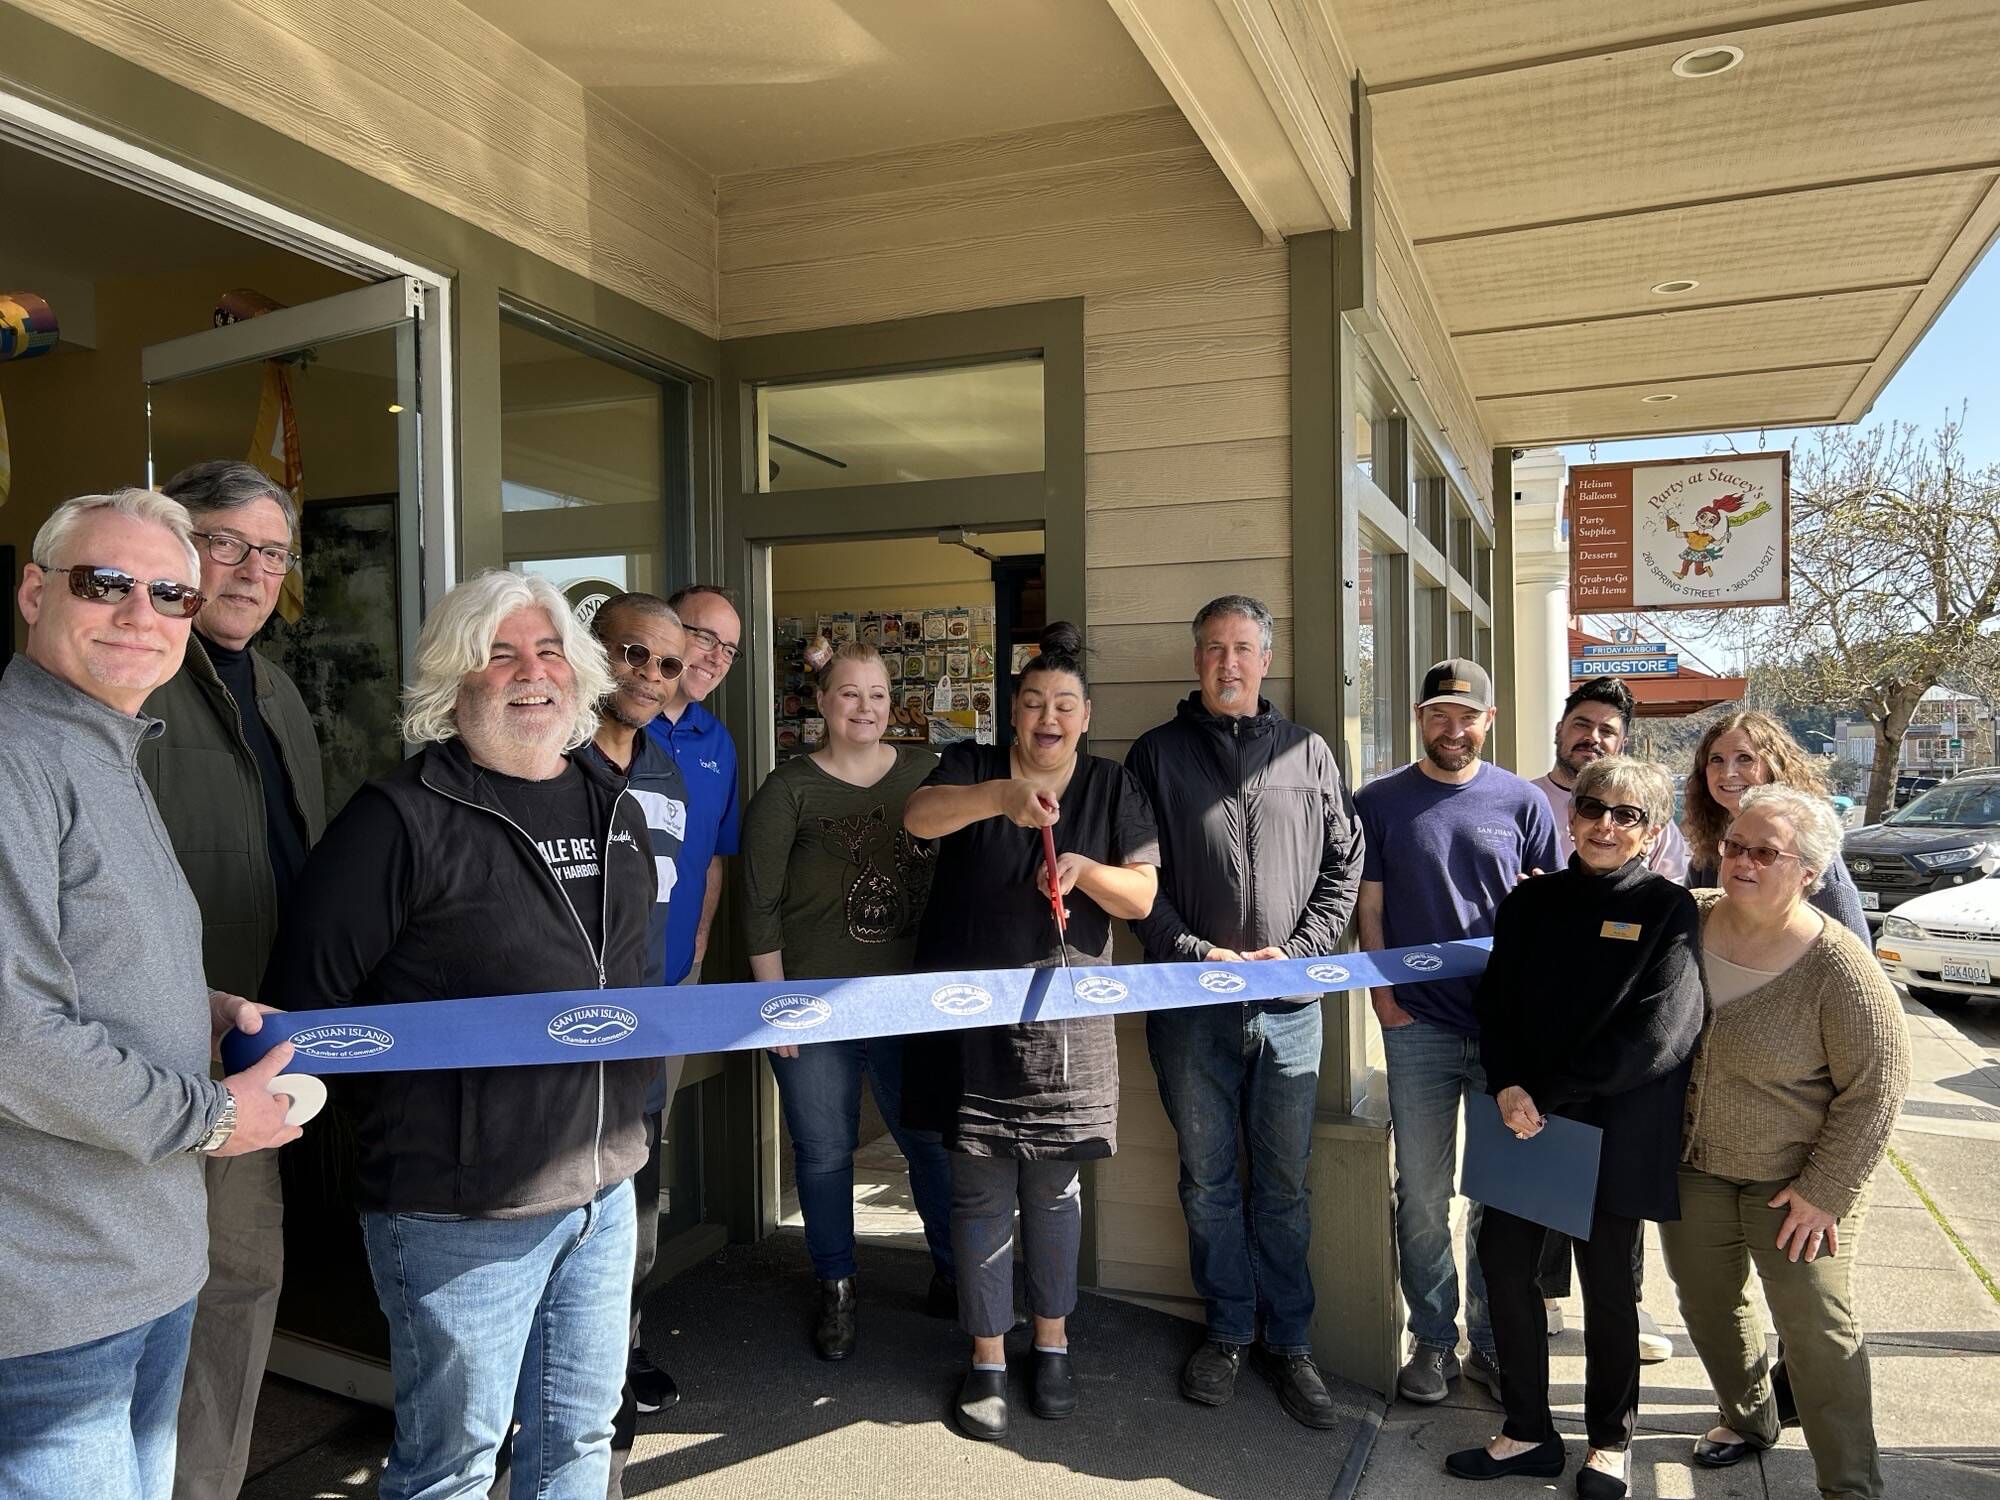 Contributed photo by the San Juan Island Chamber of Commerce
The Board of Directors and Mayor Ray Jackson at Party at Stacey’s ribbon cutting.